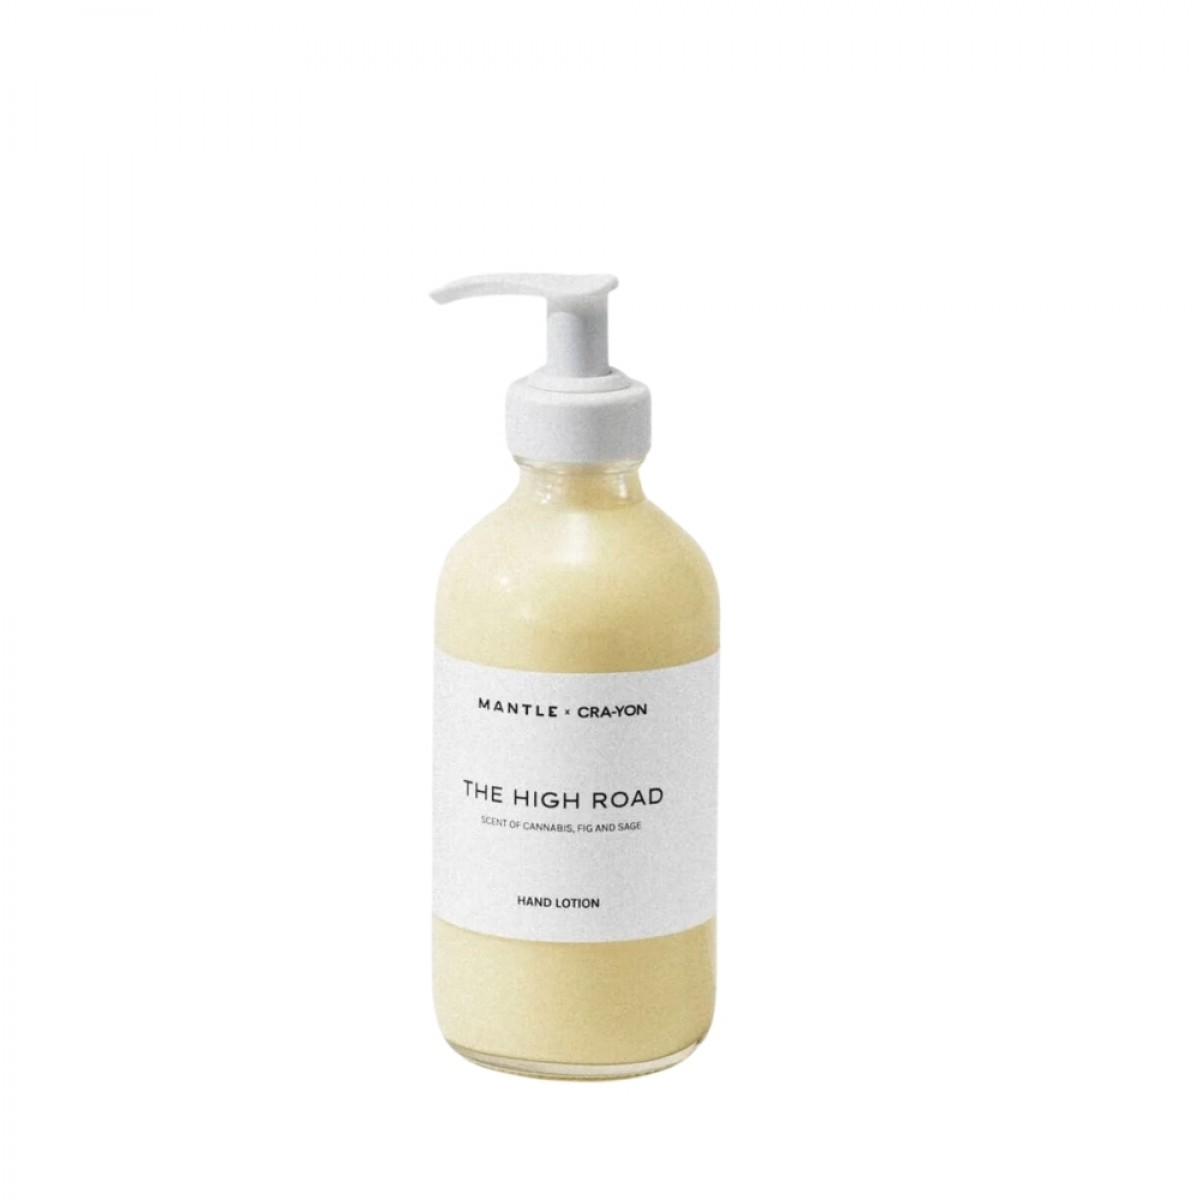  the high road hand lotion - front